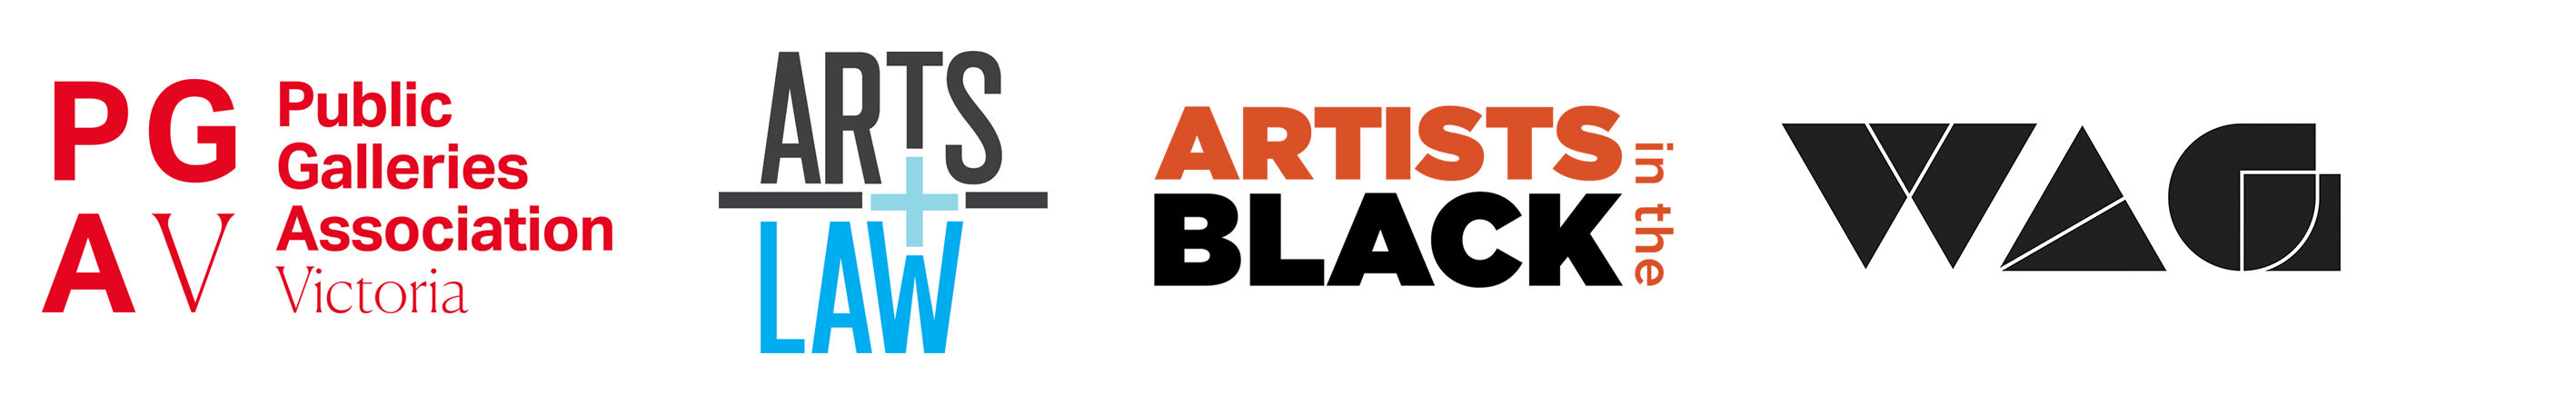 Artists in the Black at the WAG